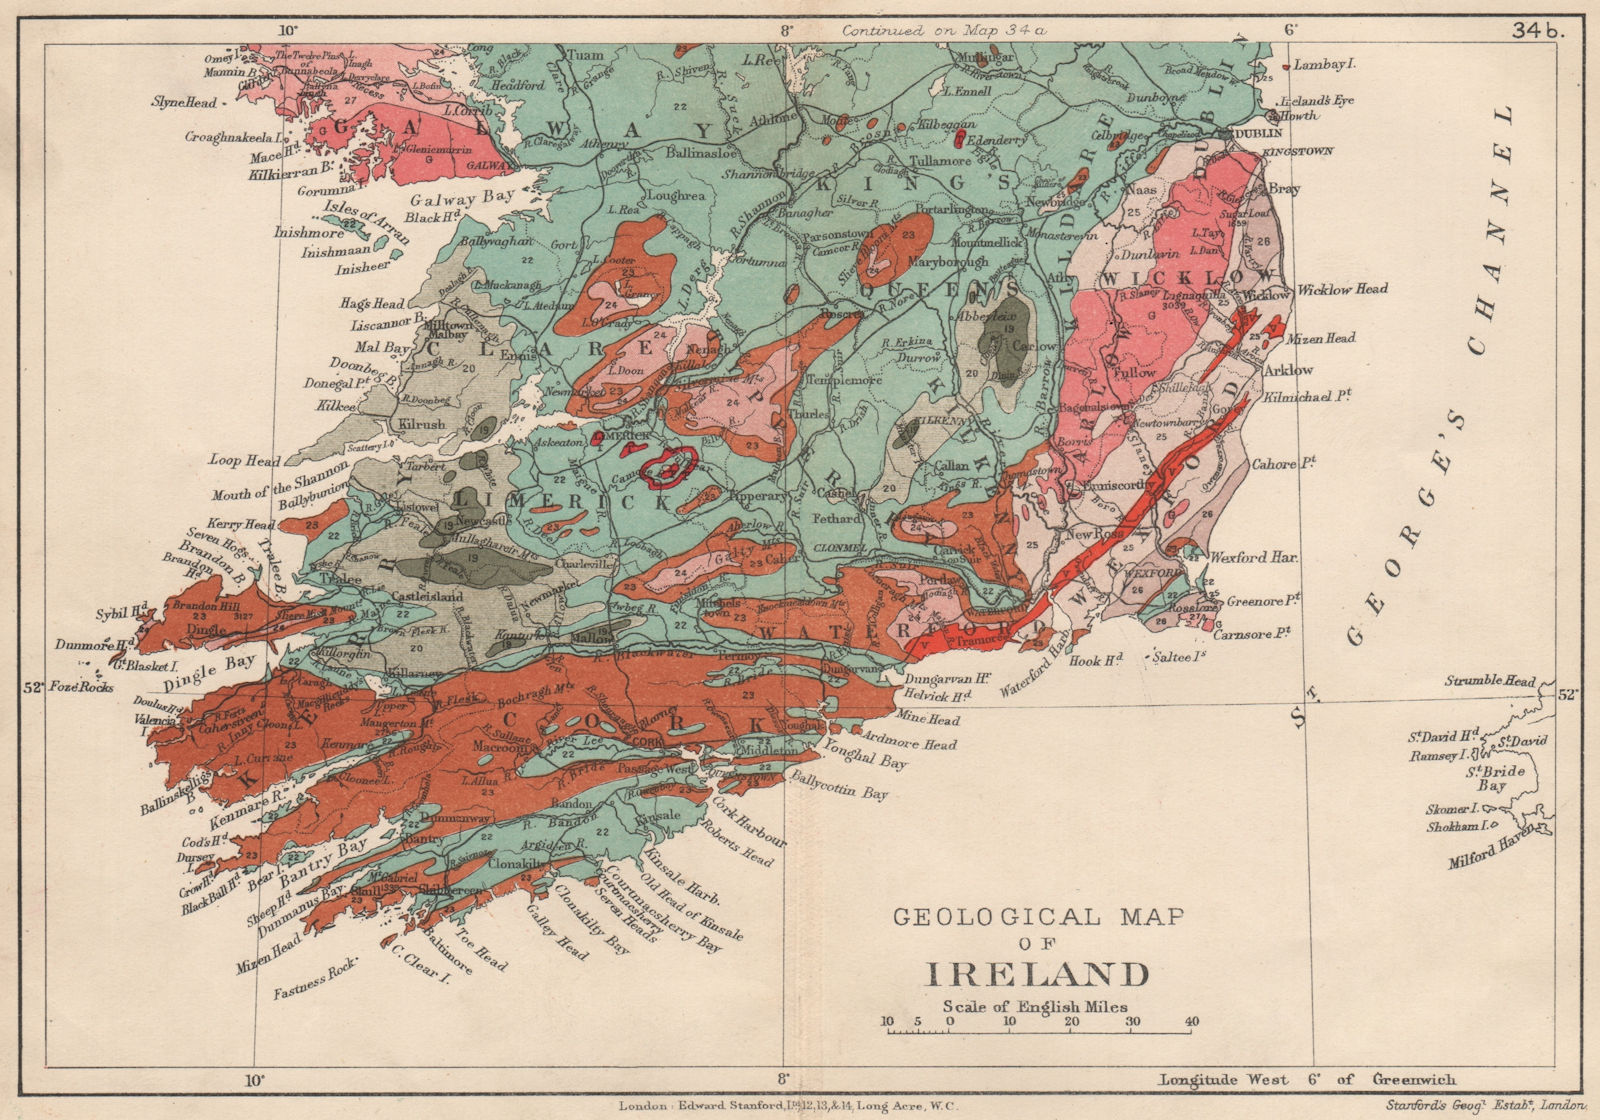 SOUTHERN IRELAND Geological map. STANFORD 1913 old antique plan chart